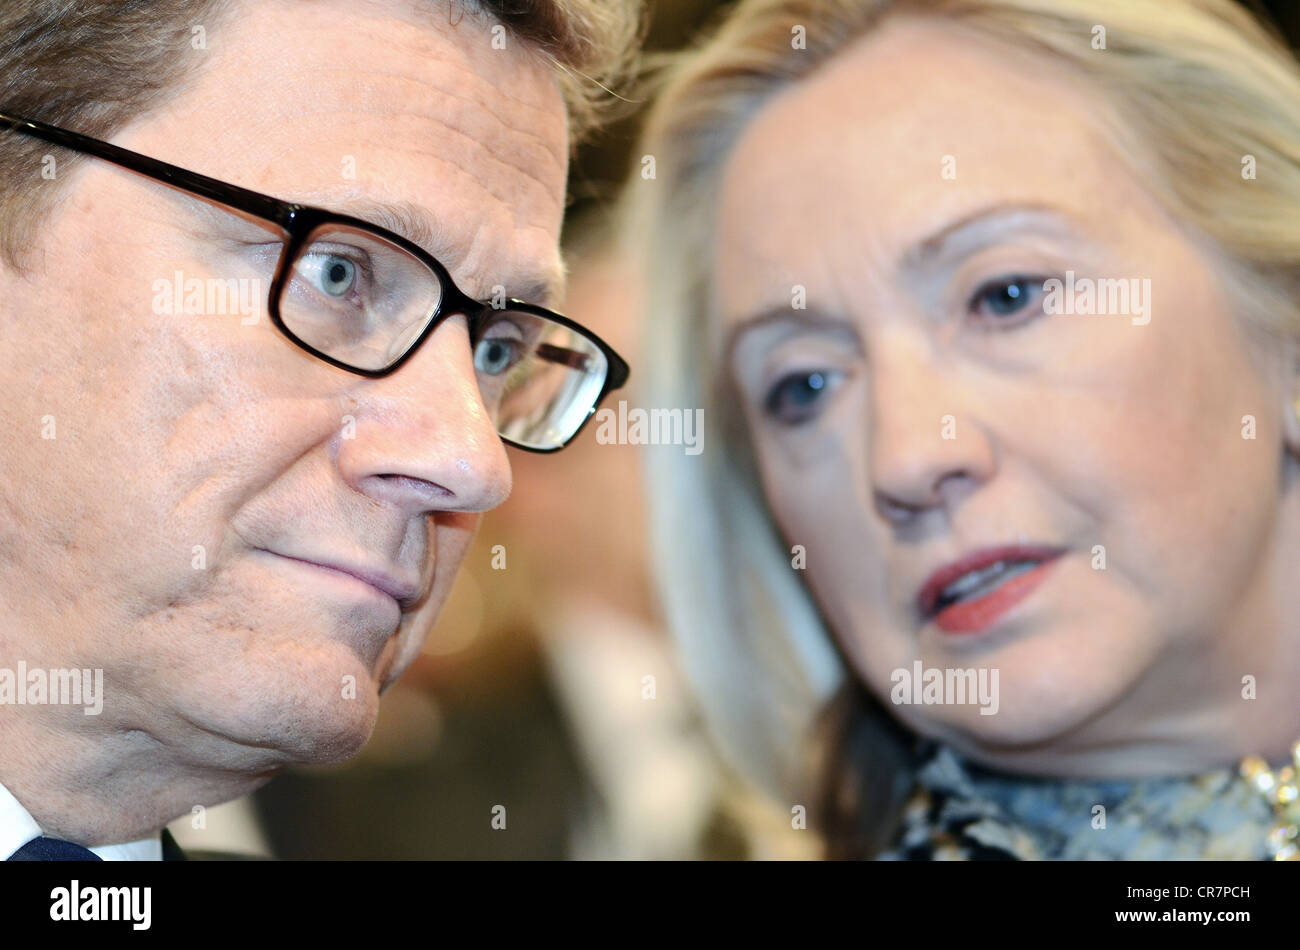 Westerwelle, Guido, 27.12.1961 - 18.3.2016, German politician,  (FDP), Federal Minister of Foreign Affairs since 2009, portrait, in conversation with Hillary Clinton, Munich security conference, Munich, Germany, 2.2.2012 - 5.2.2012, Stock Photo